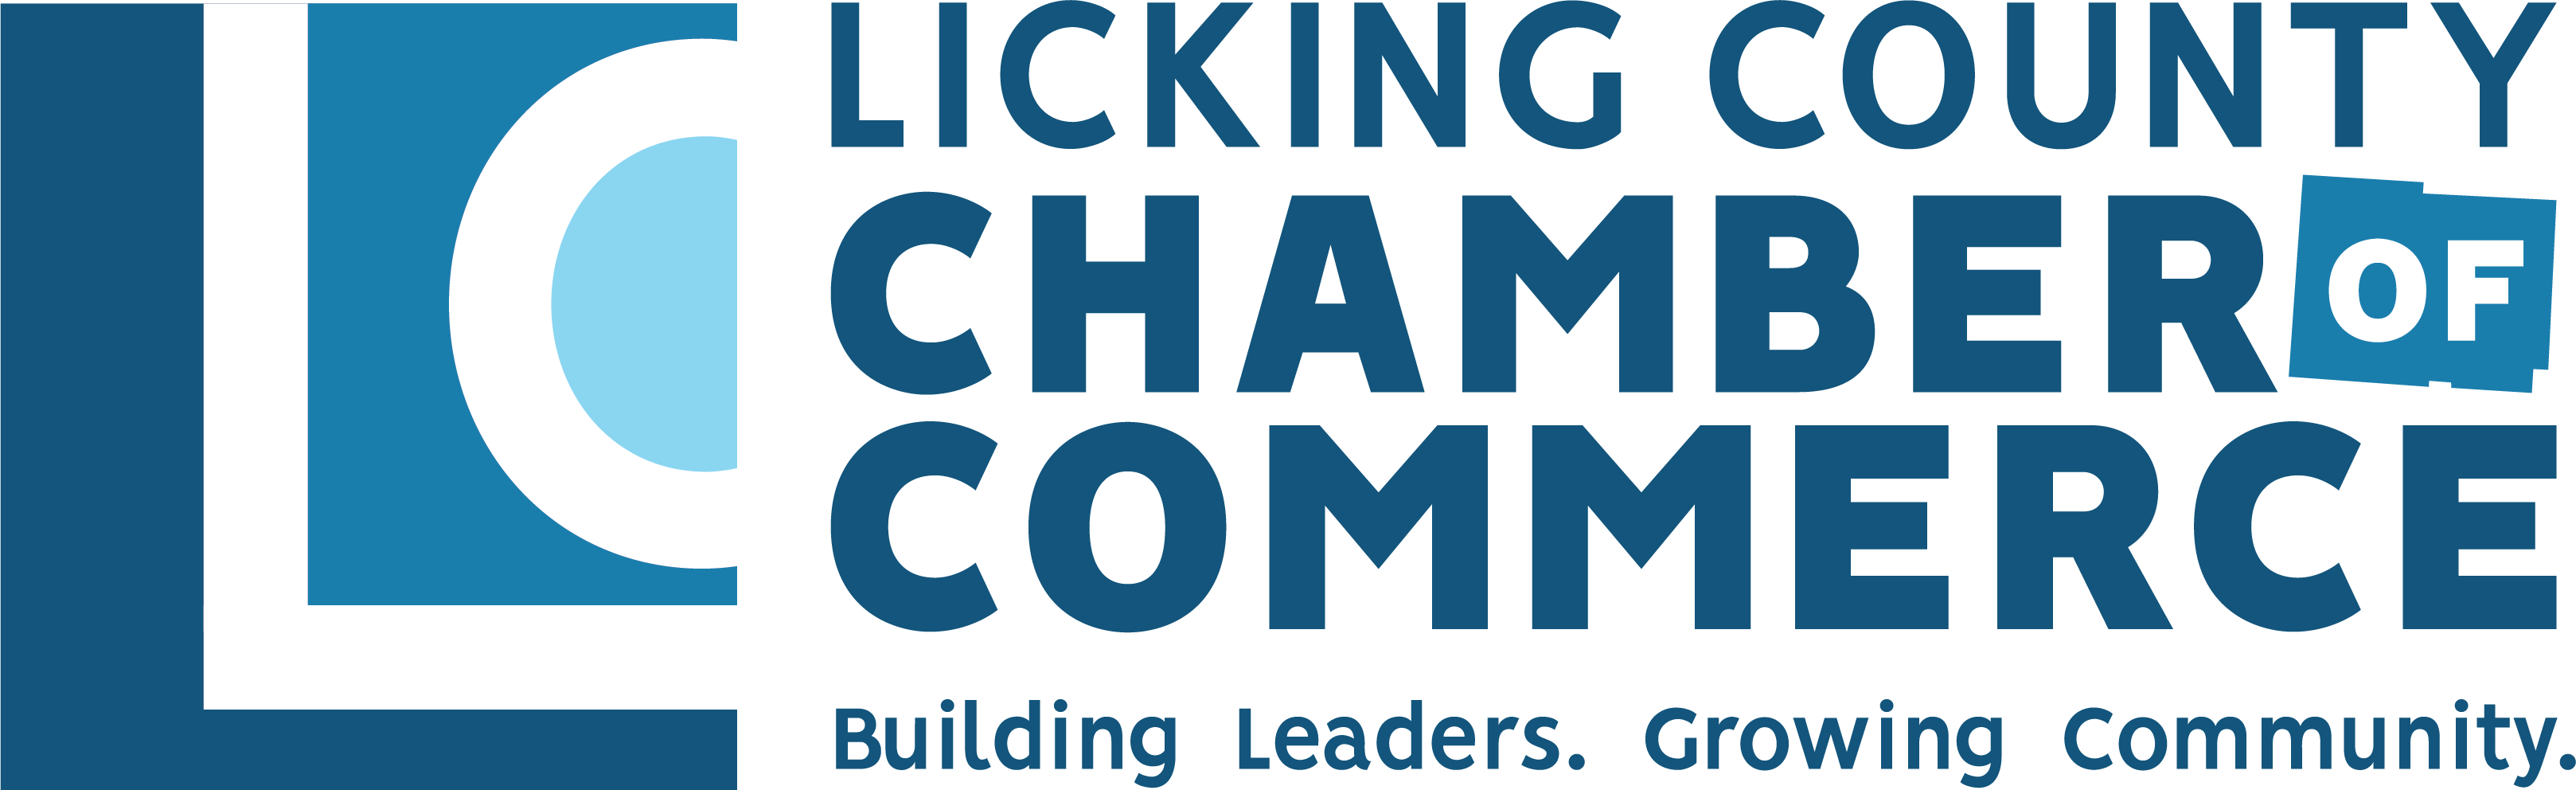 Licking County Chamber of Commerce Logo